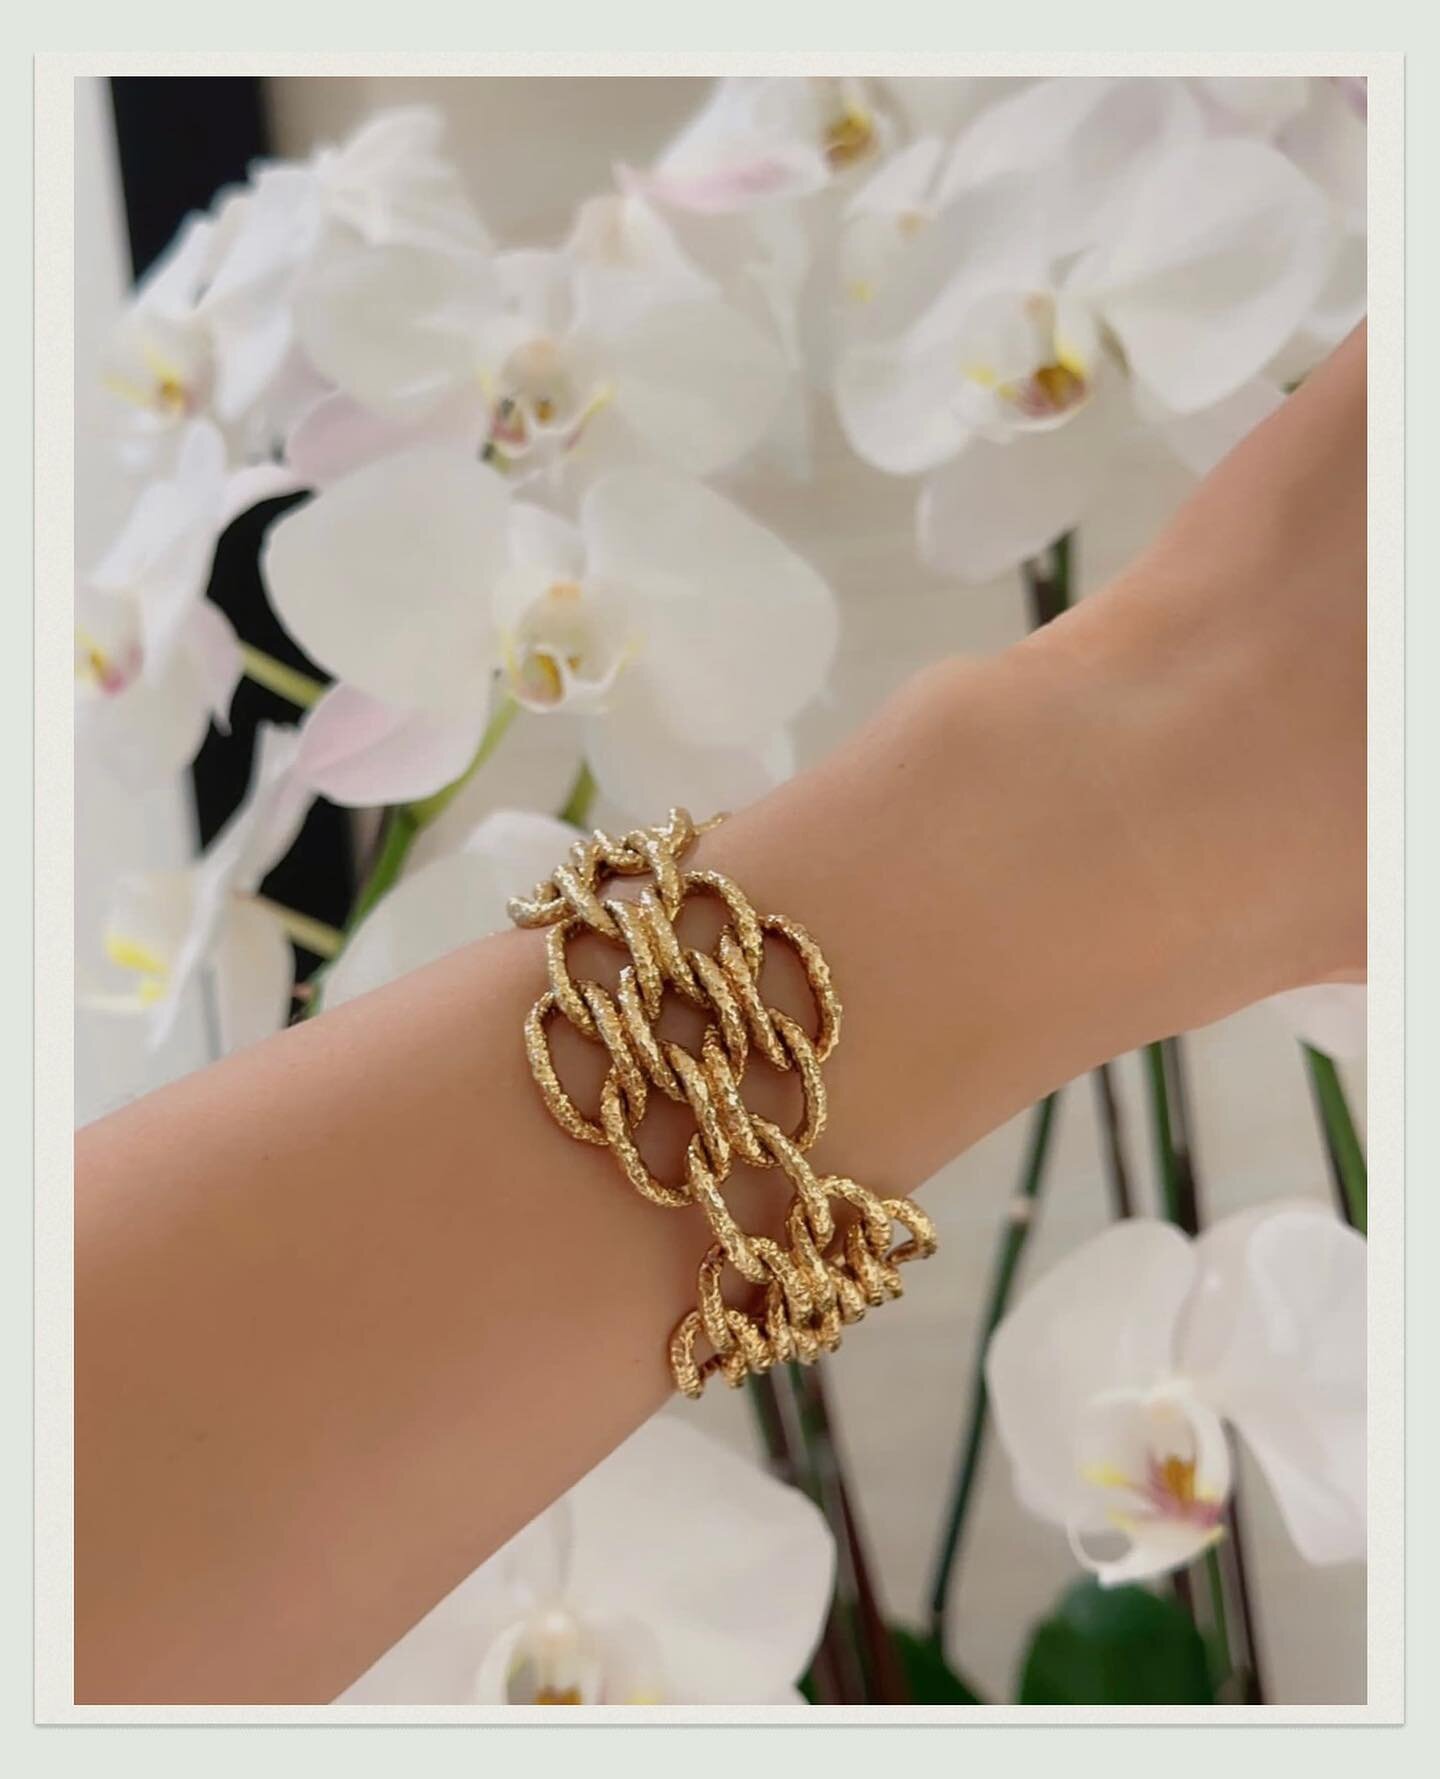 A Bold Textured Gold Bracelet by &hellip;&hellip;. can you guess who made this just from looking at the links and the design? 
Would you choose this or an Alhambra necklace or bracelet? 
.
.
.
.
.
. 
. 
. 
#forsale #vca #vancleefarpels #vancleefbrace